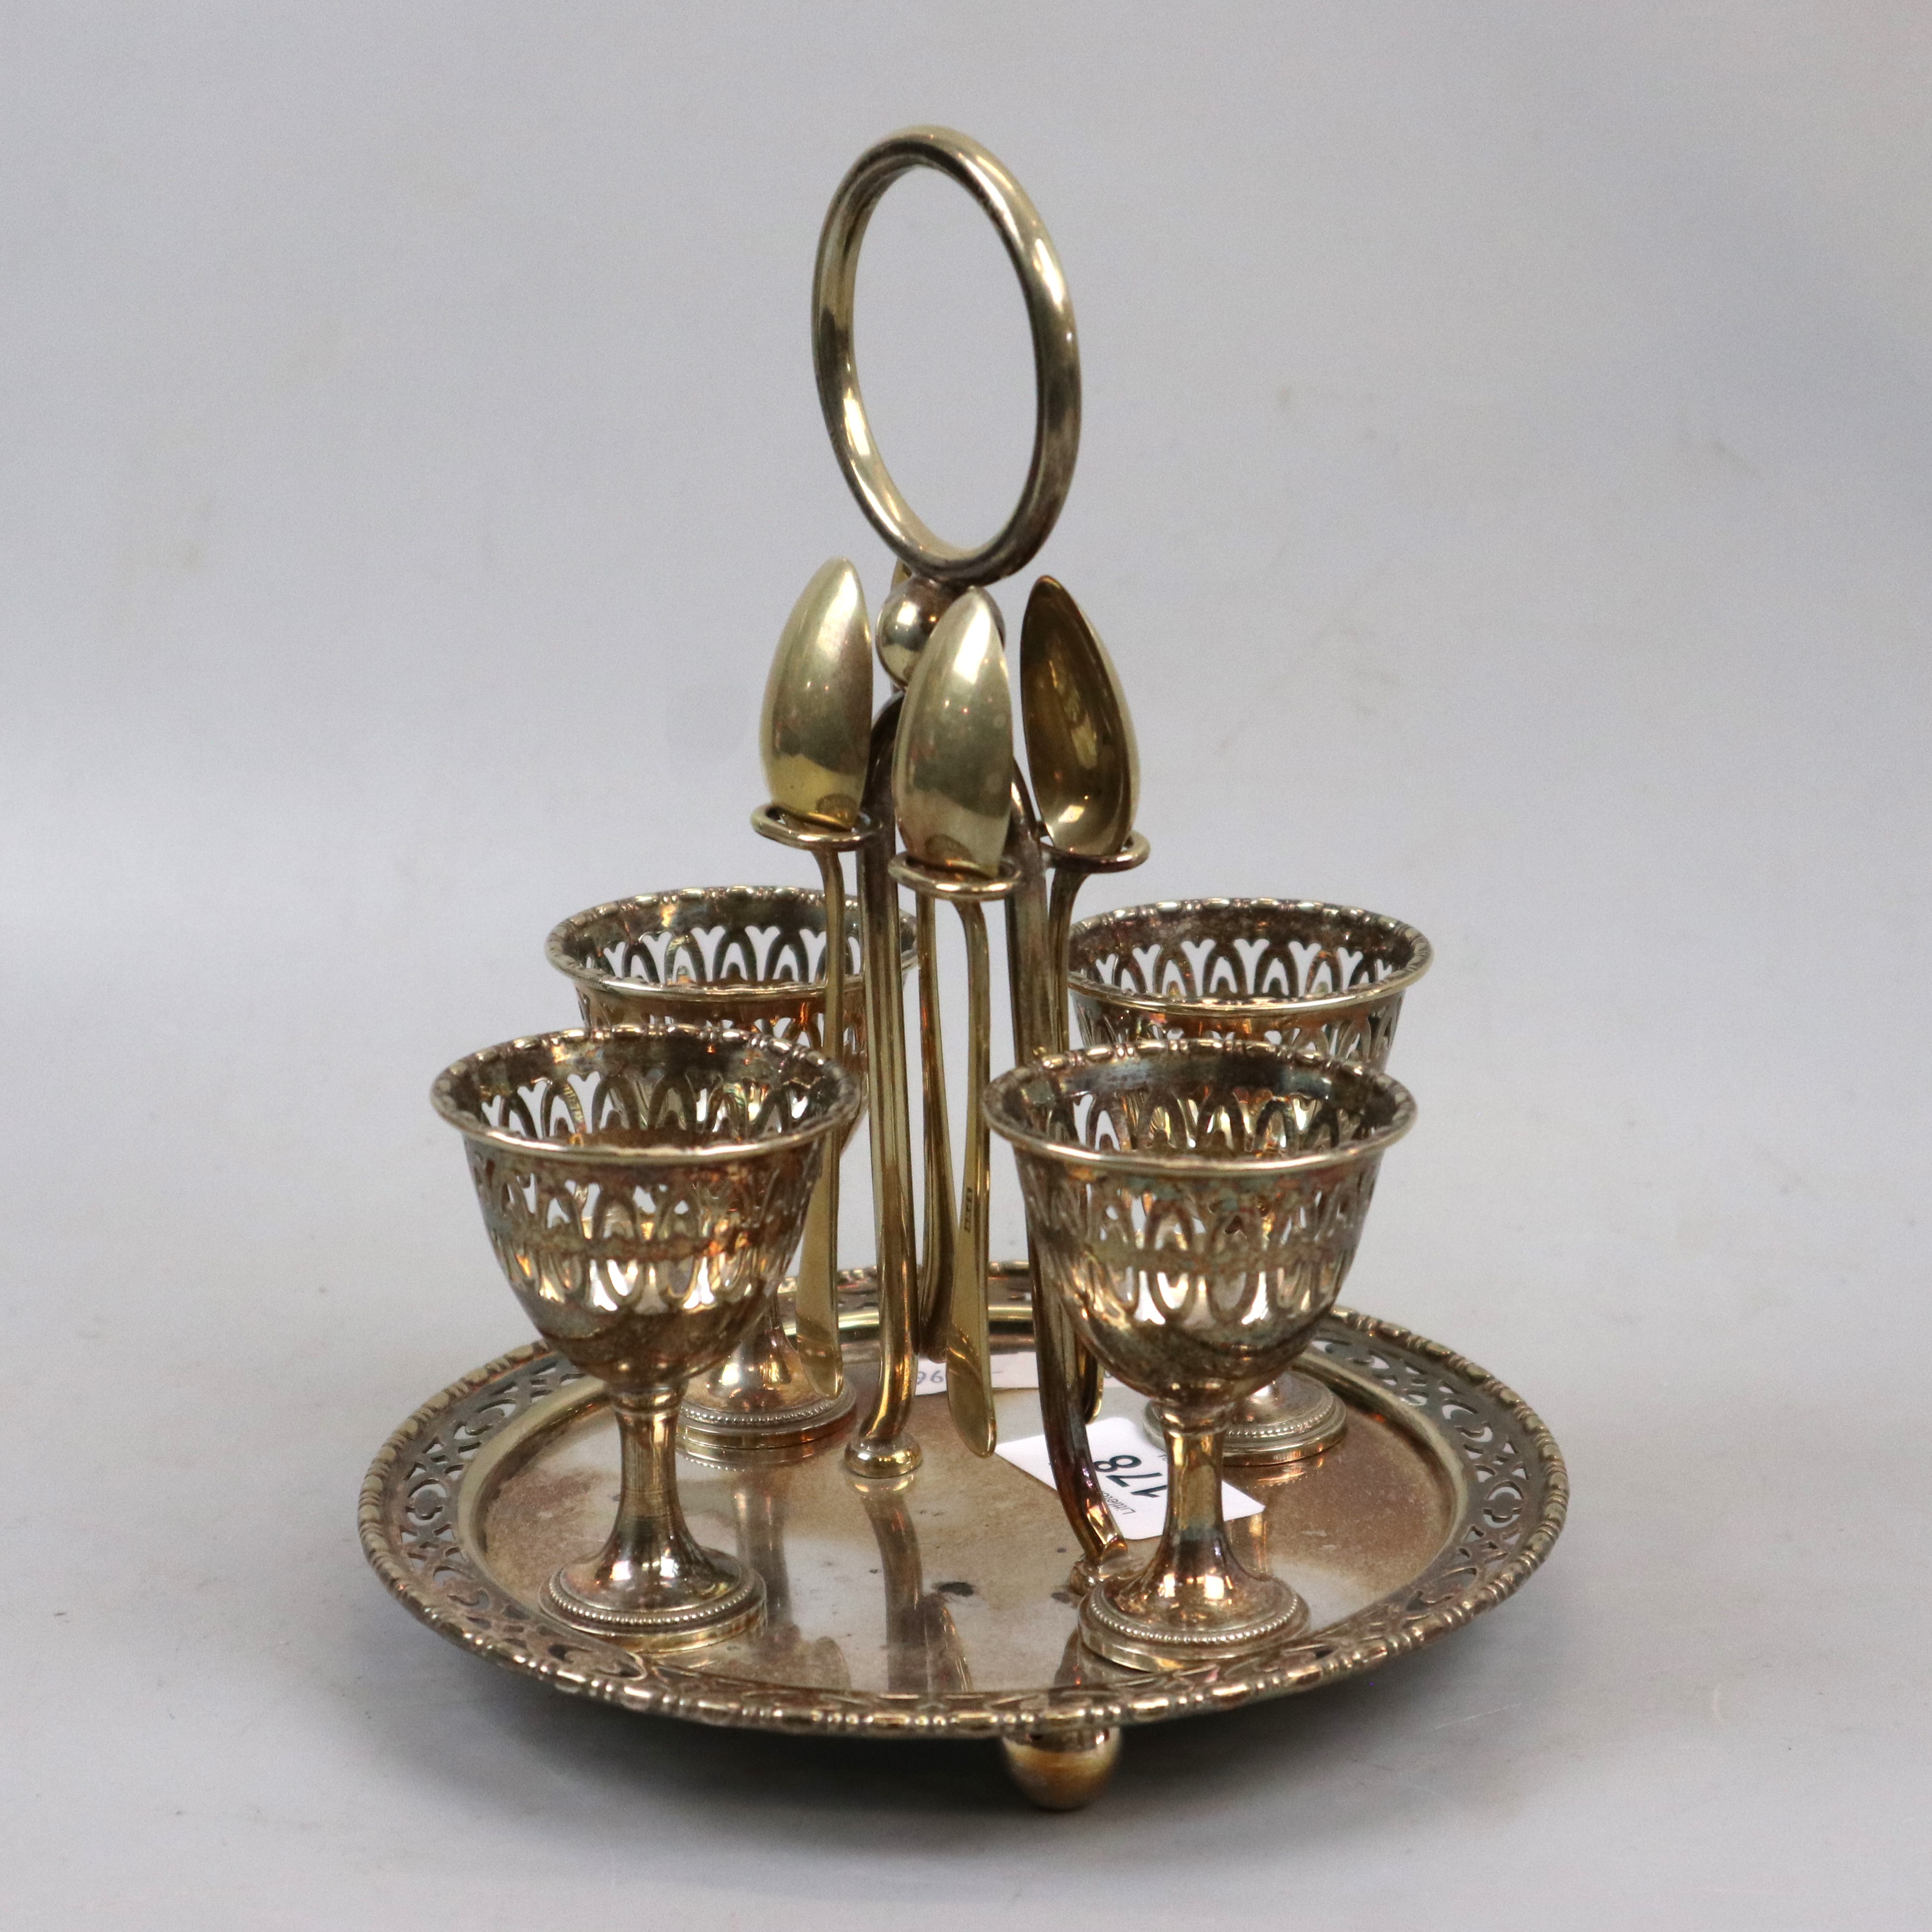 Silverplate egg cups and stand - Image 2 of 2